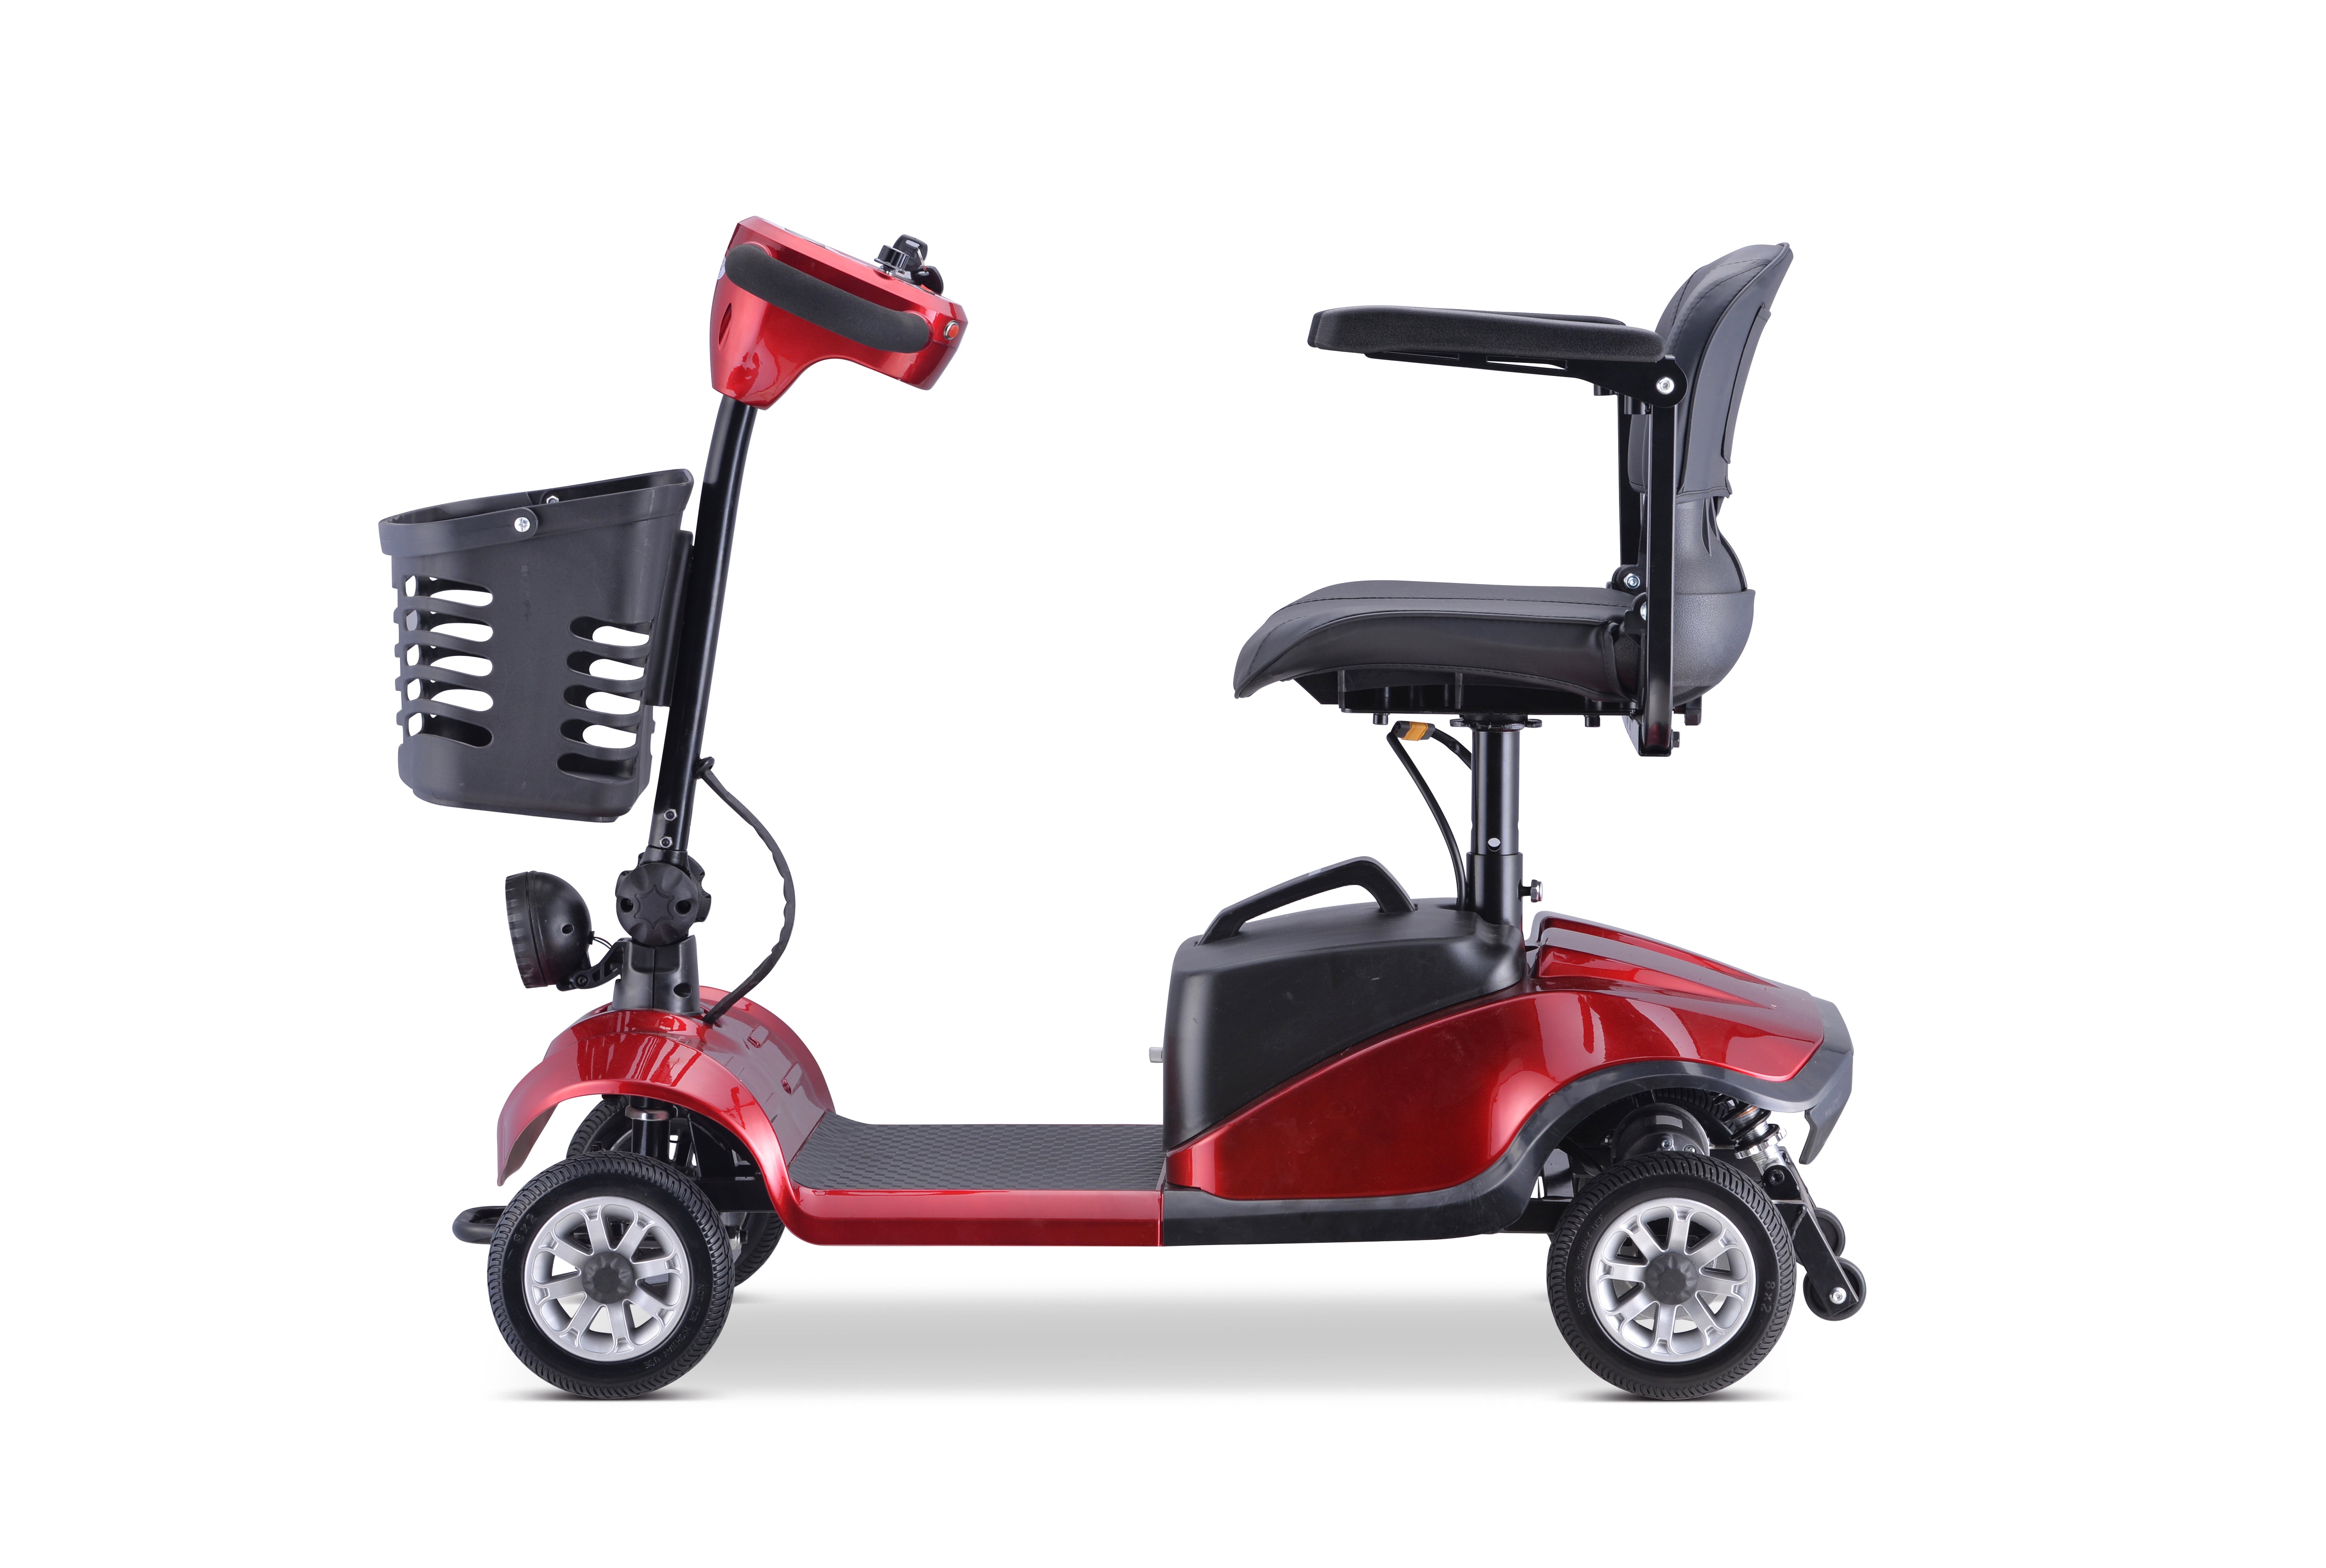 Rubicon FX01 All Terrain Mobility Scooters